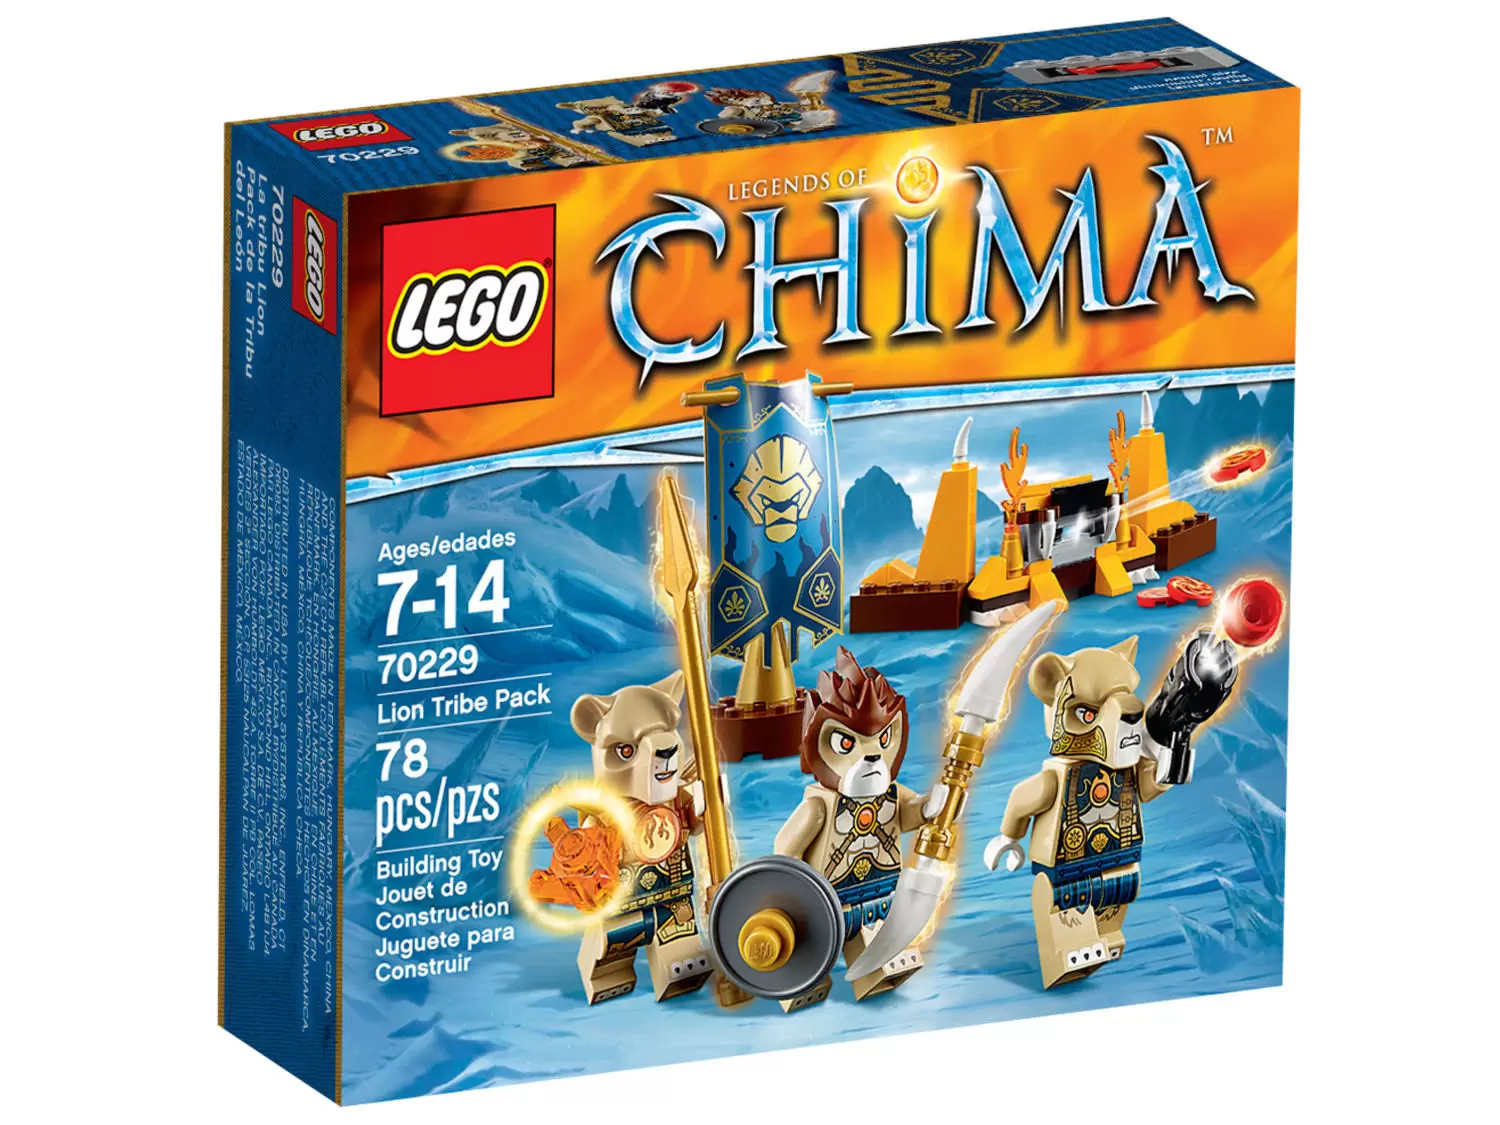 LEGO Legends of Chima - Lion Tribe Pack